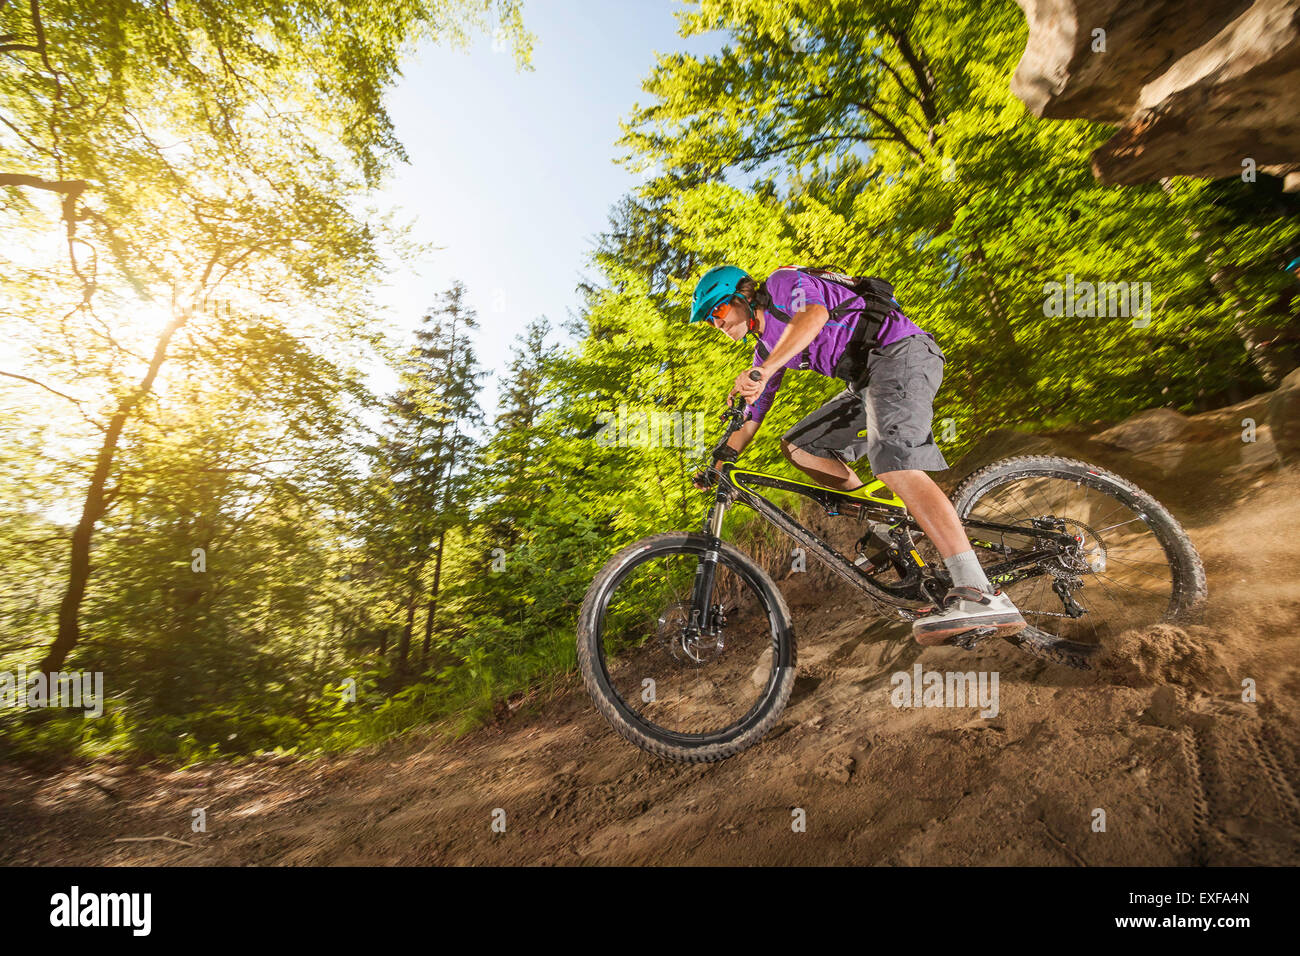 Young man downhill mountain biking in forest Stock Photo